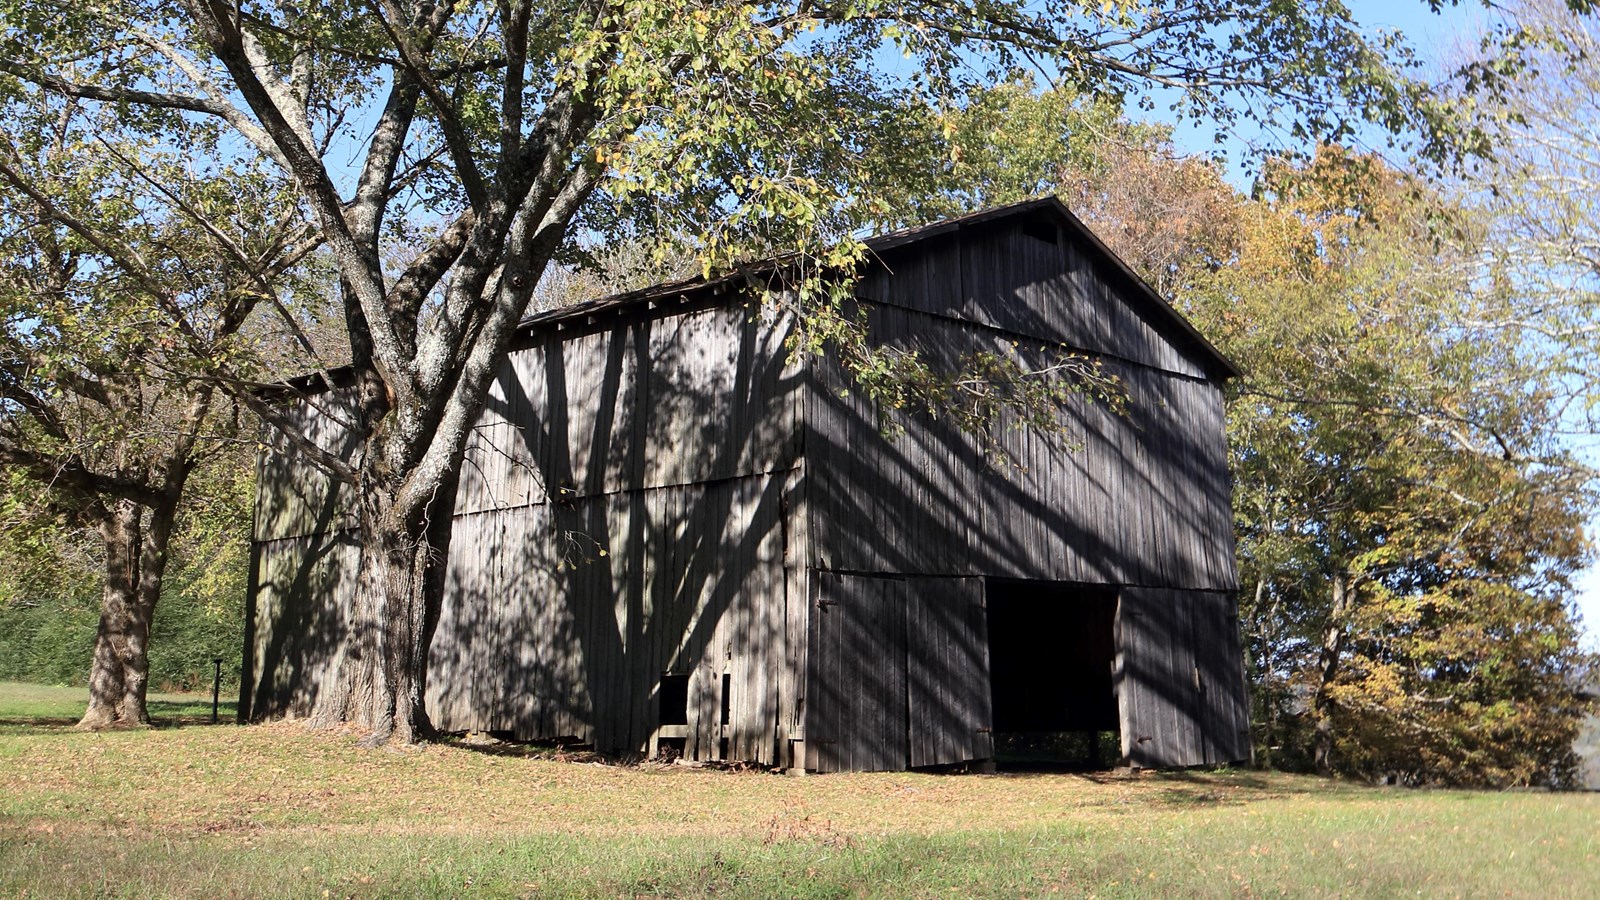 Weathered wooden barn with sliding doors on the front. A large shade tree towers over the barn.